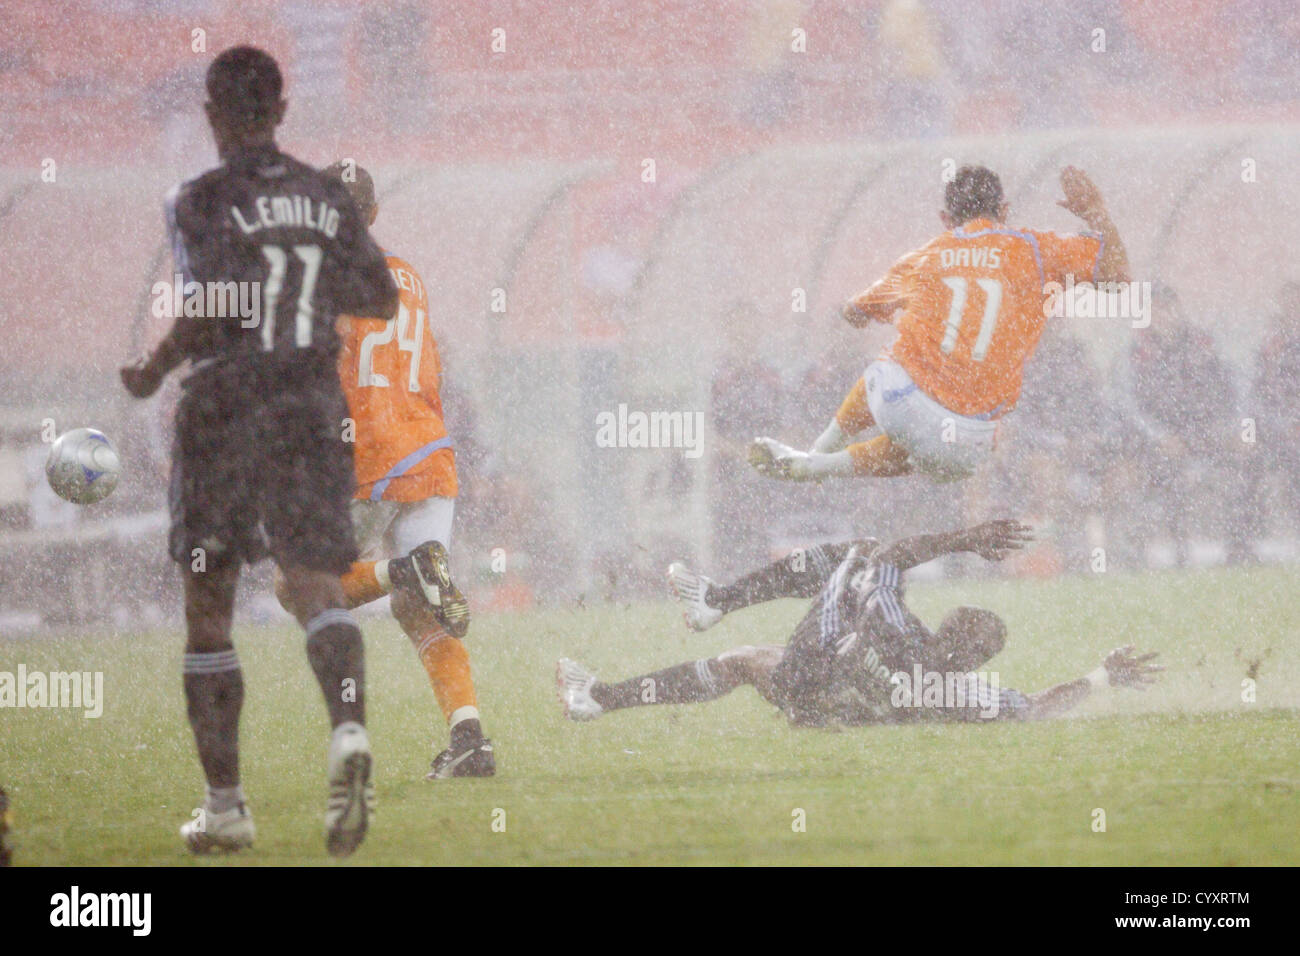 Gonzalo Martinez of DC United tackles Brad Davis of the Houston Dynamo in torrential rain during a Major League Soccer match. Stock Photo